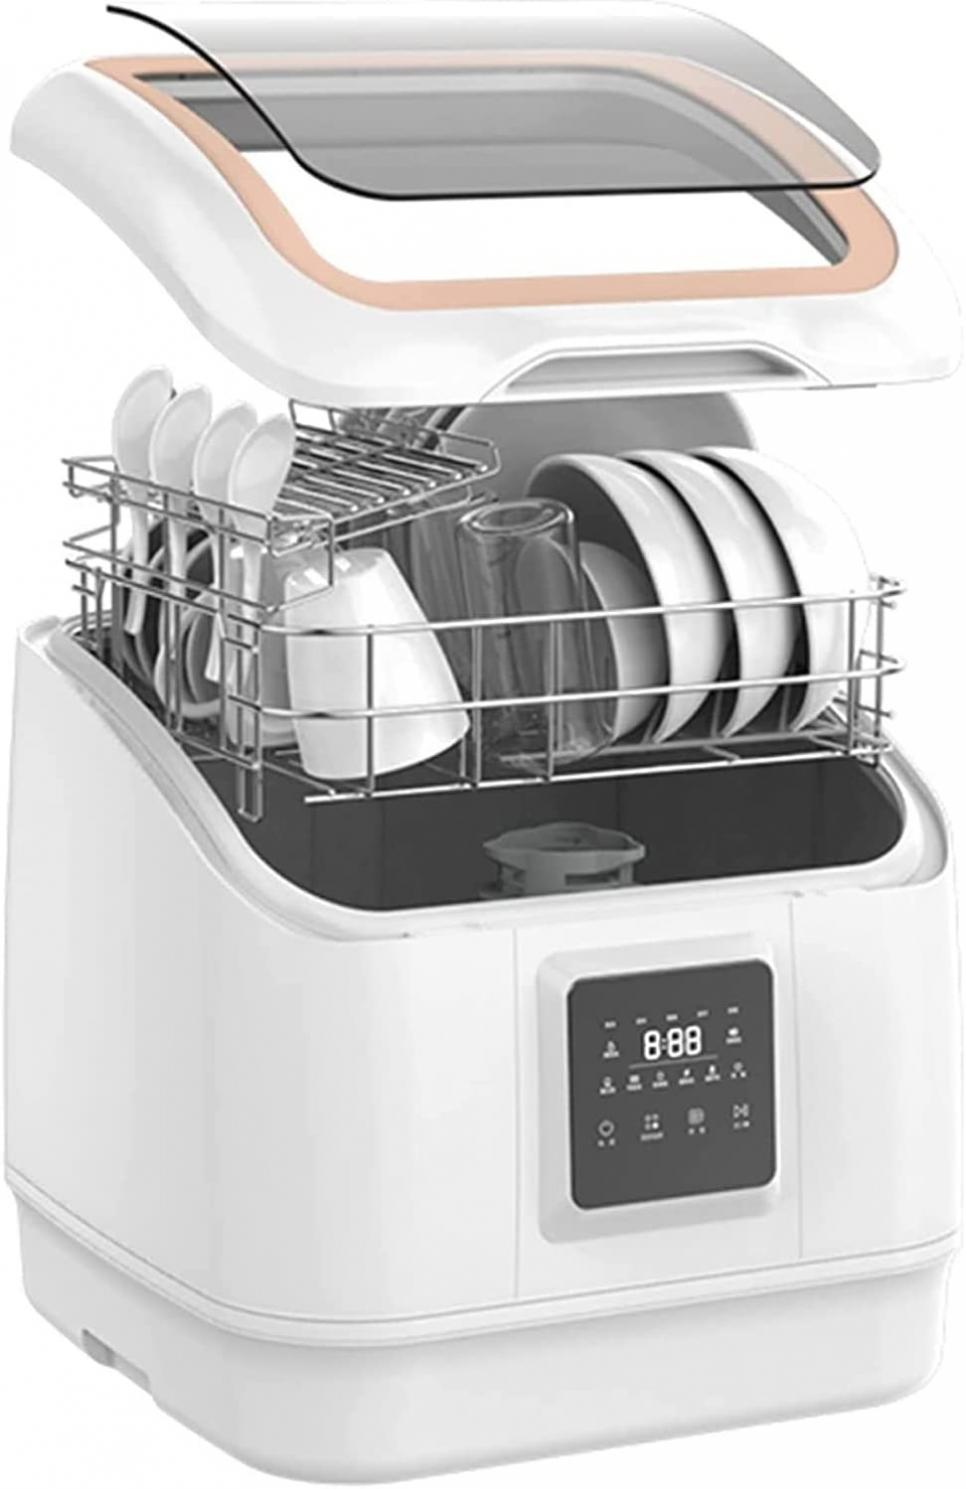 GATASE Countertop Dishwasher, IAGREEA Portable Compact Dishwasher with 7 Washing Programs, Anti-Leakage, Fruit & Vegetable Soaking with Basket, for Small Apartments, Dorms and RVs, White